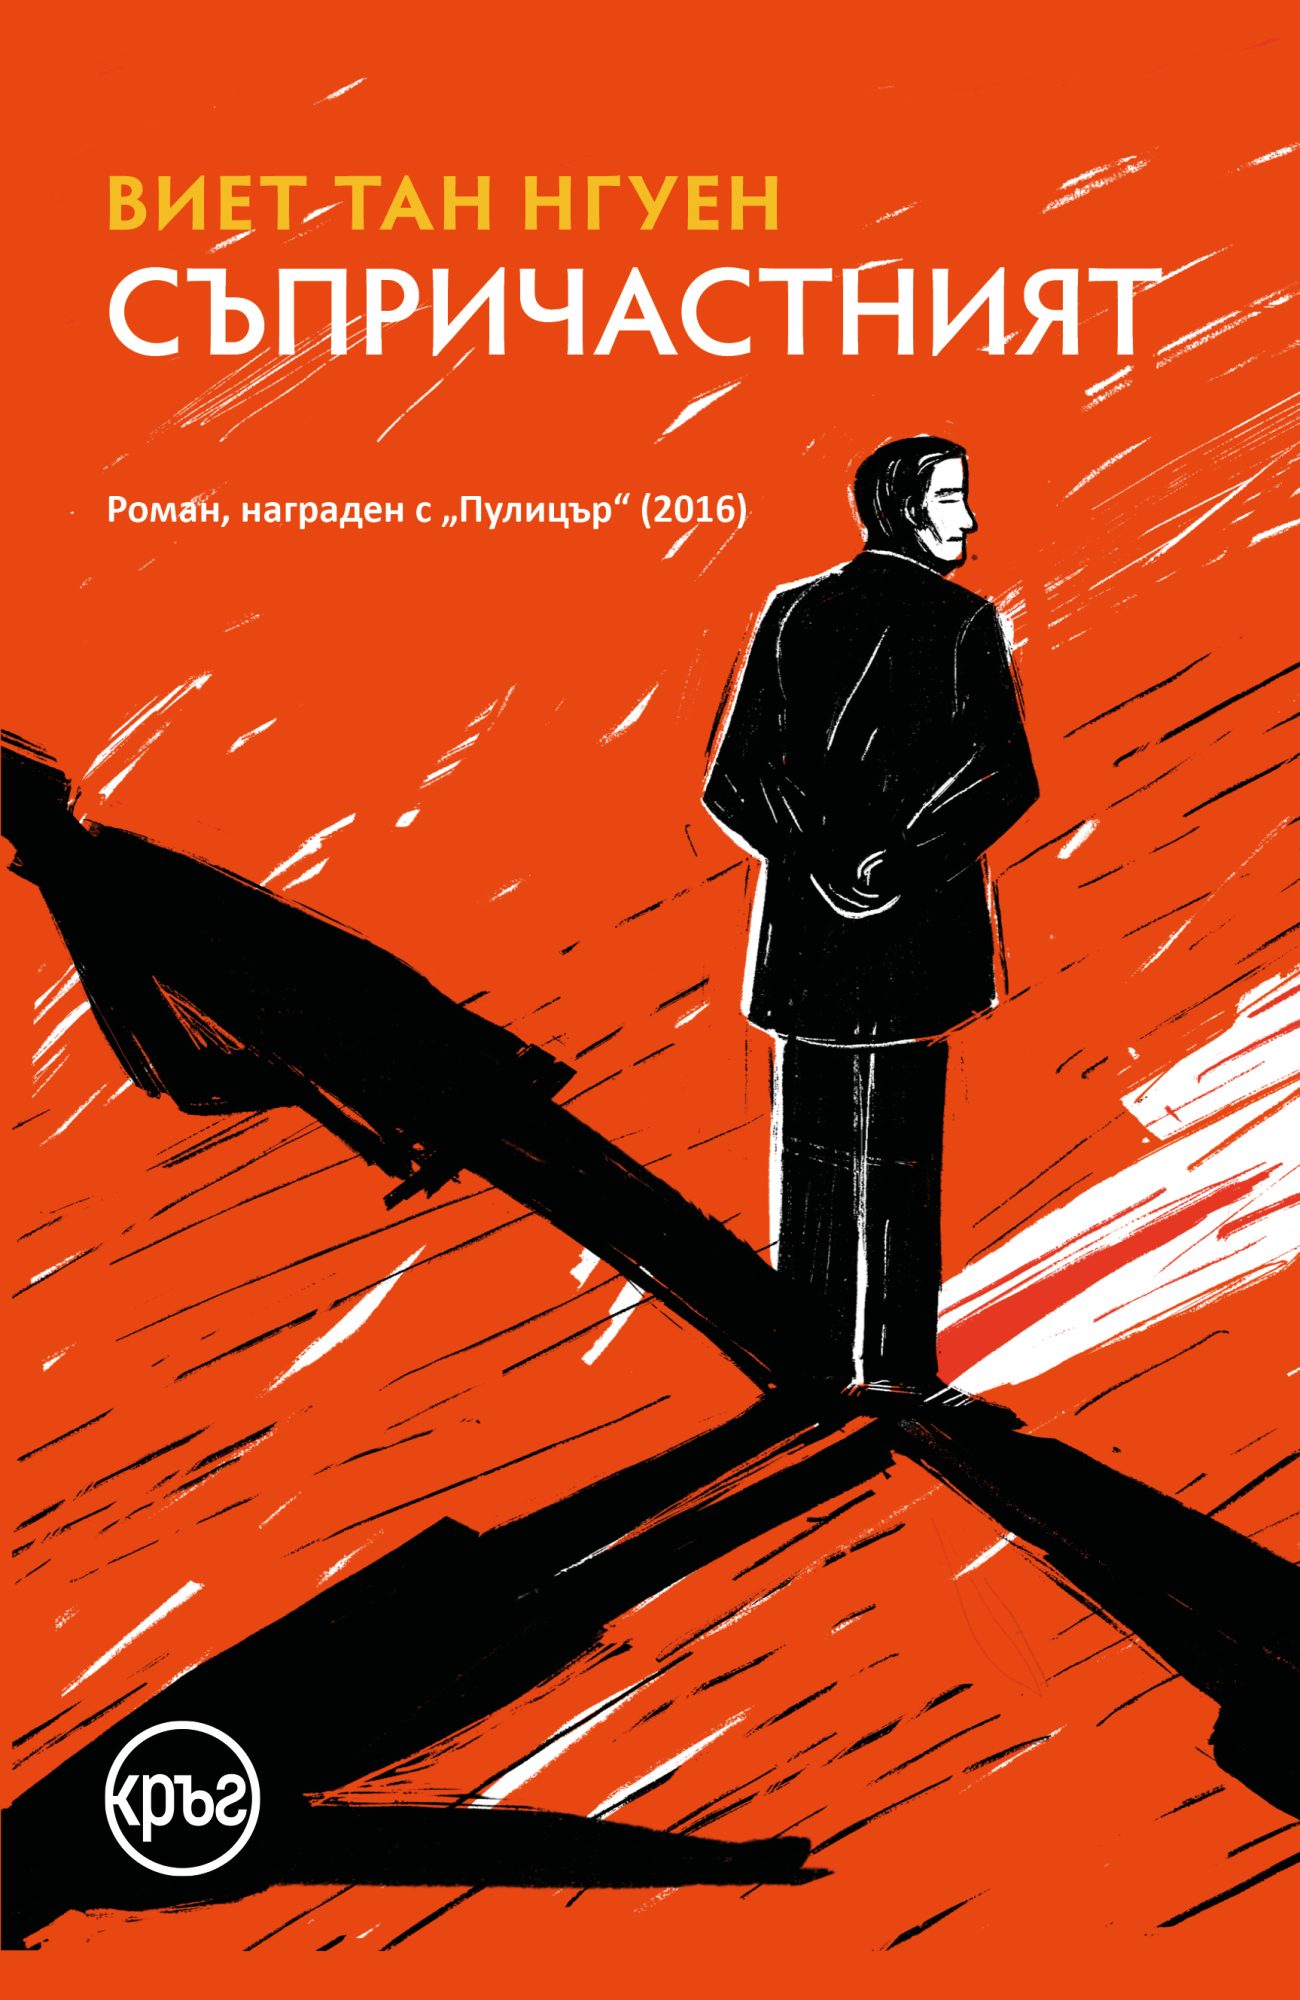 "The Sympathizer" Bulgarian book cover